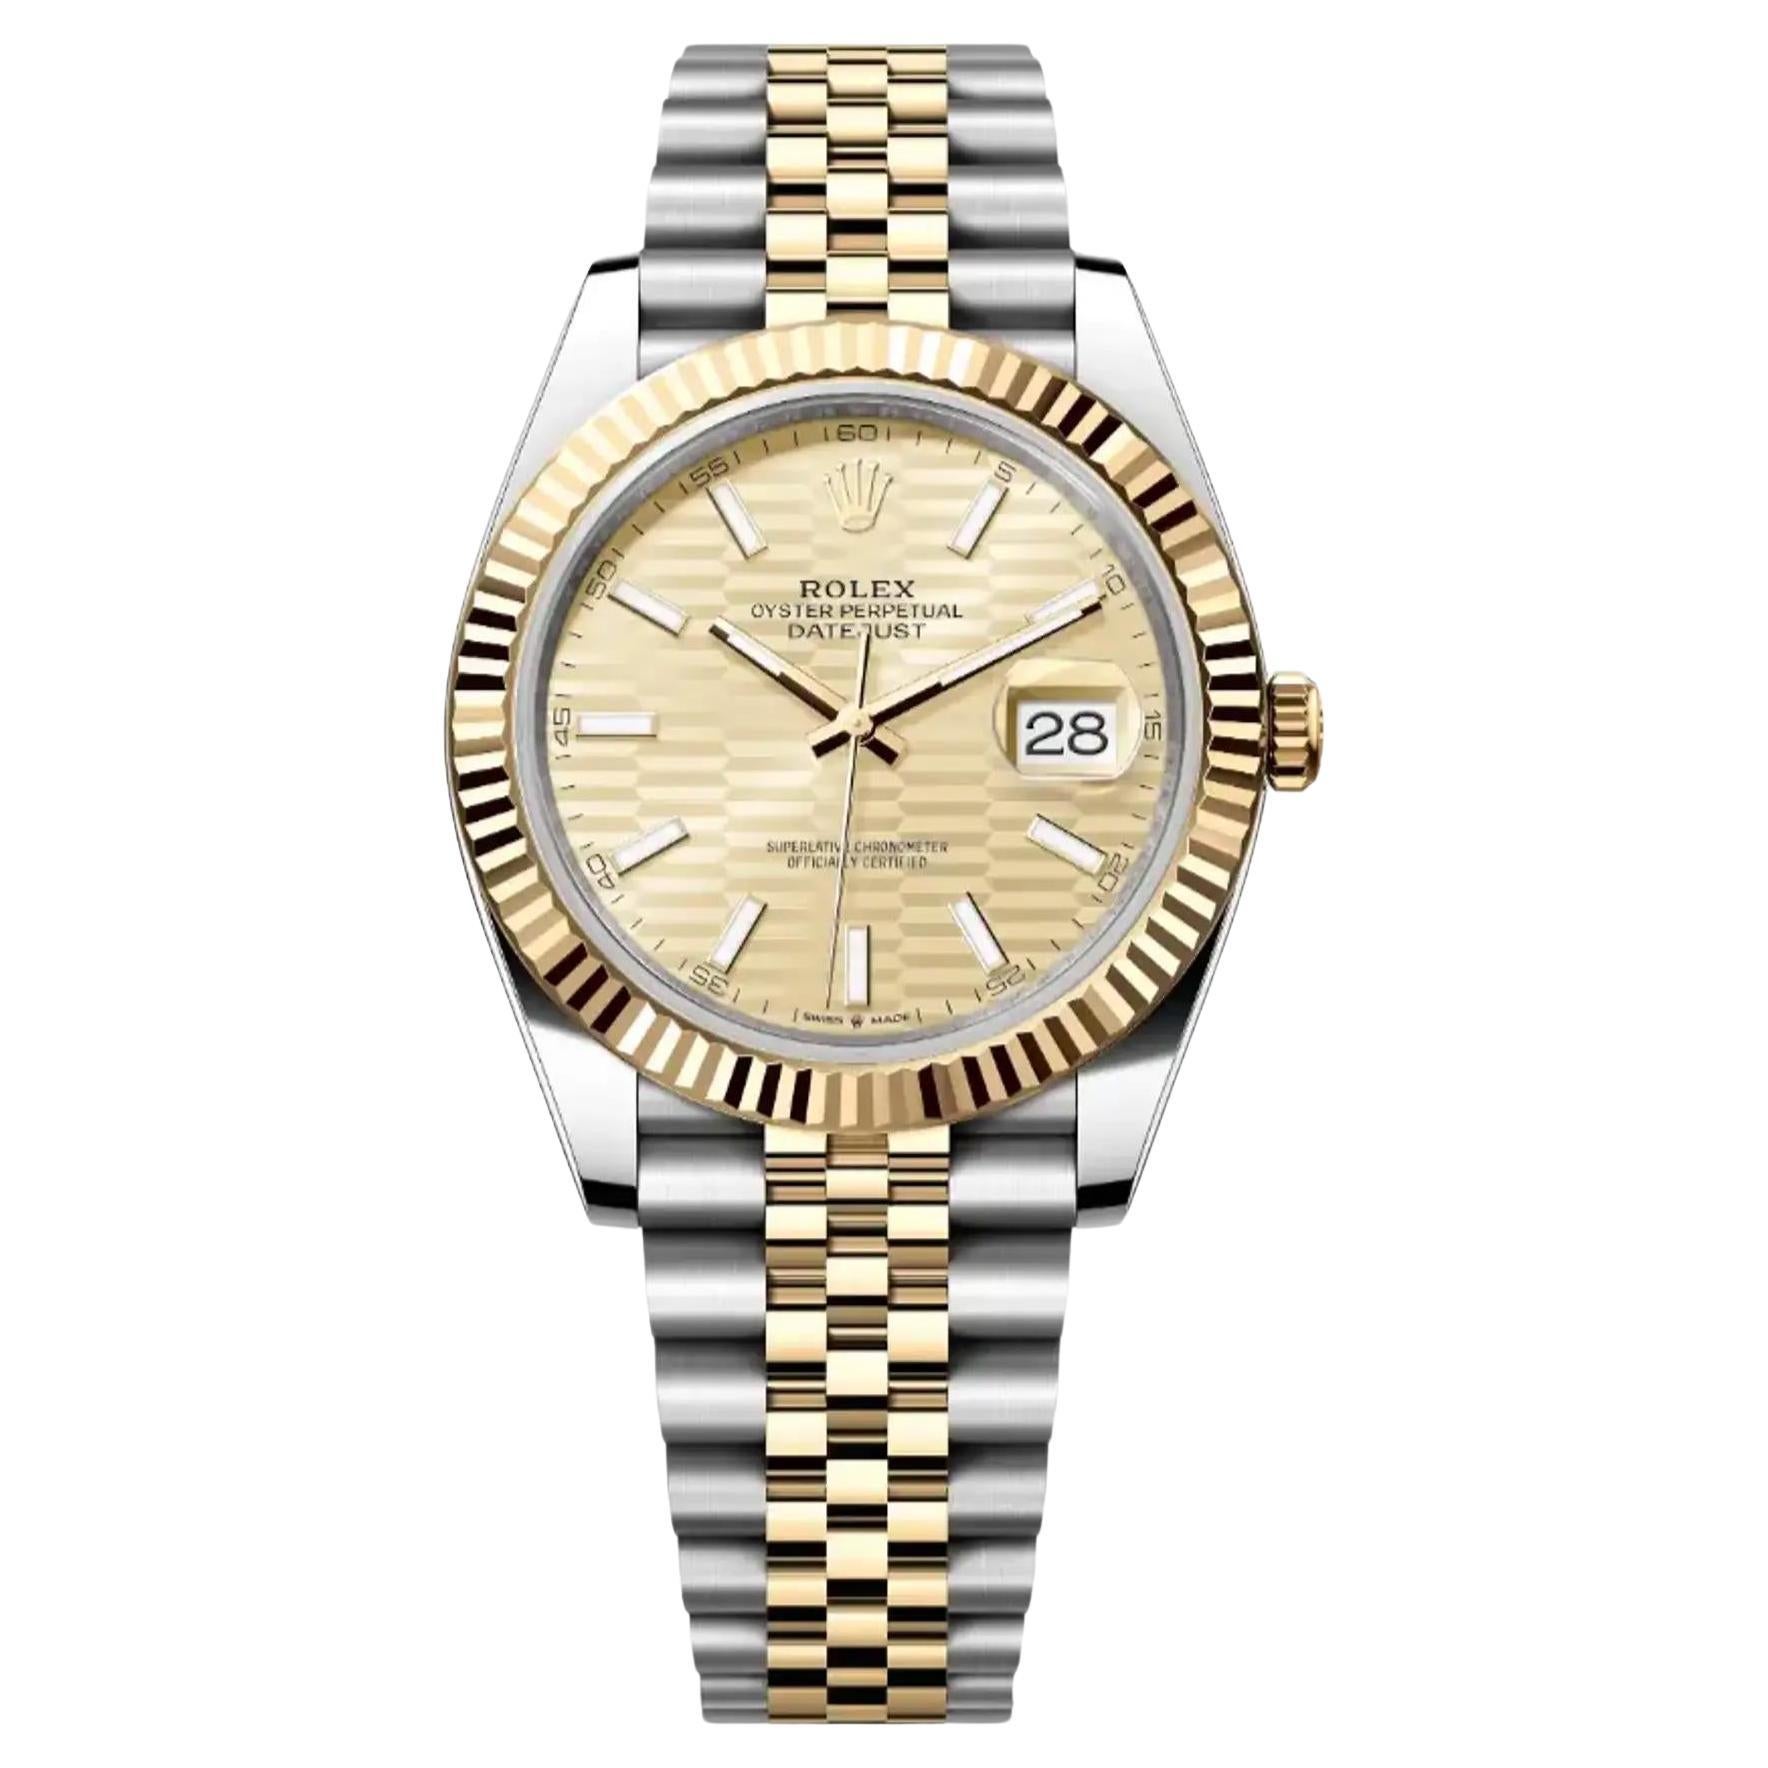 NEW Rolex Datejust 18K Yellow Gold Steel Champagne Motif Dial Watch 126333